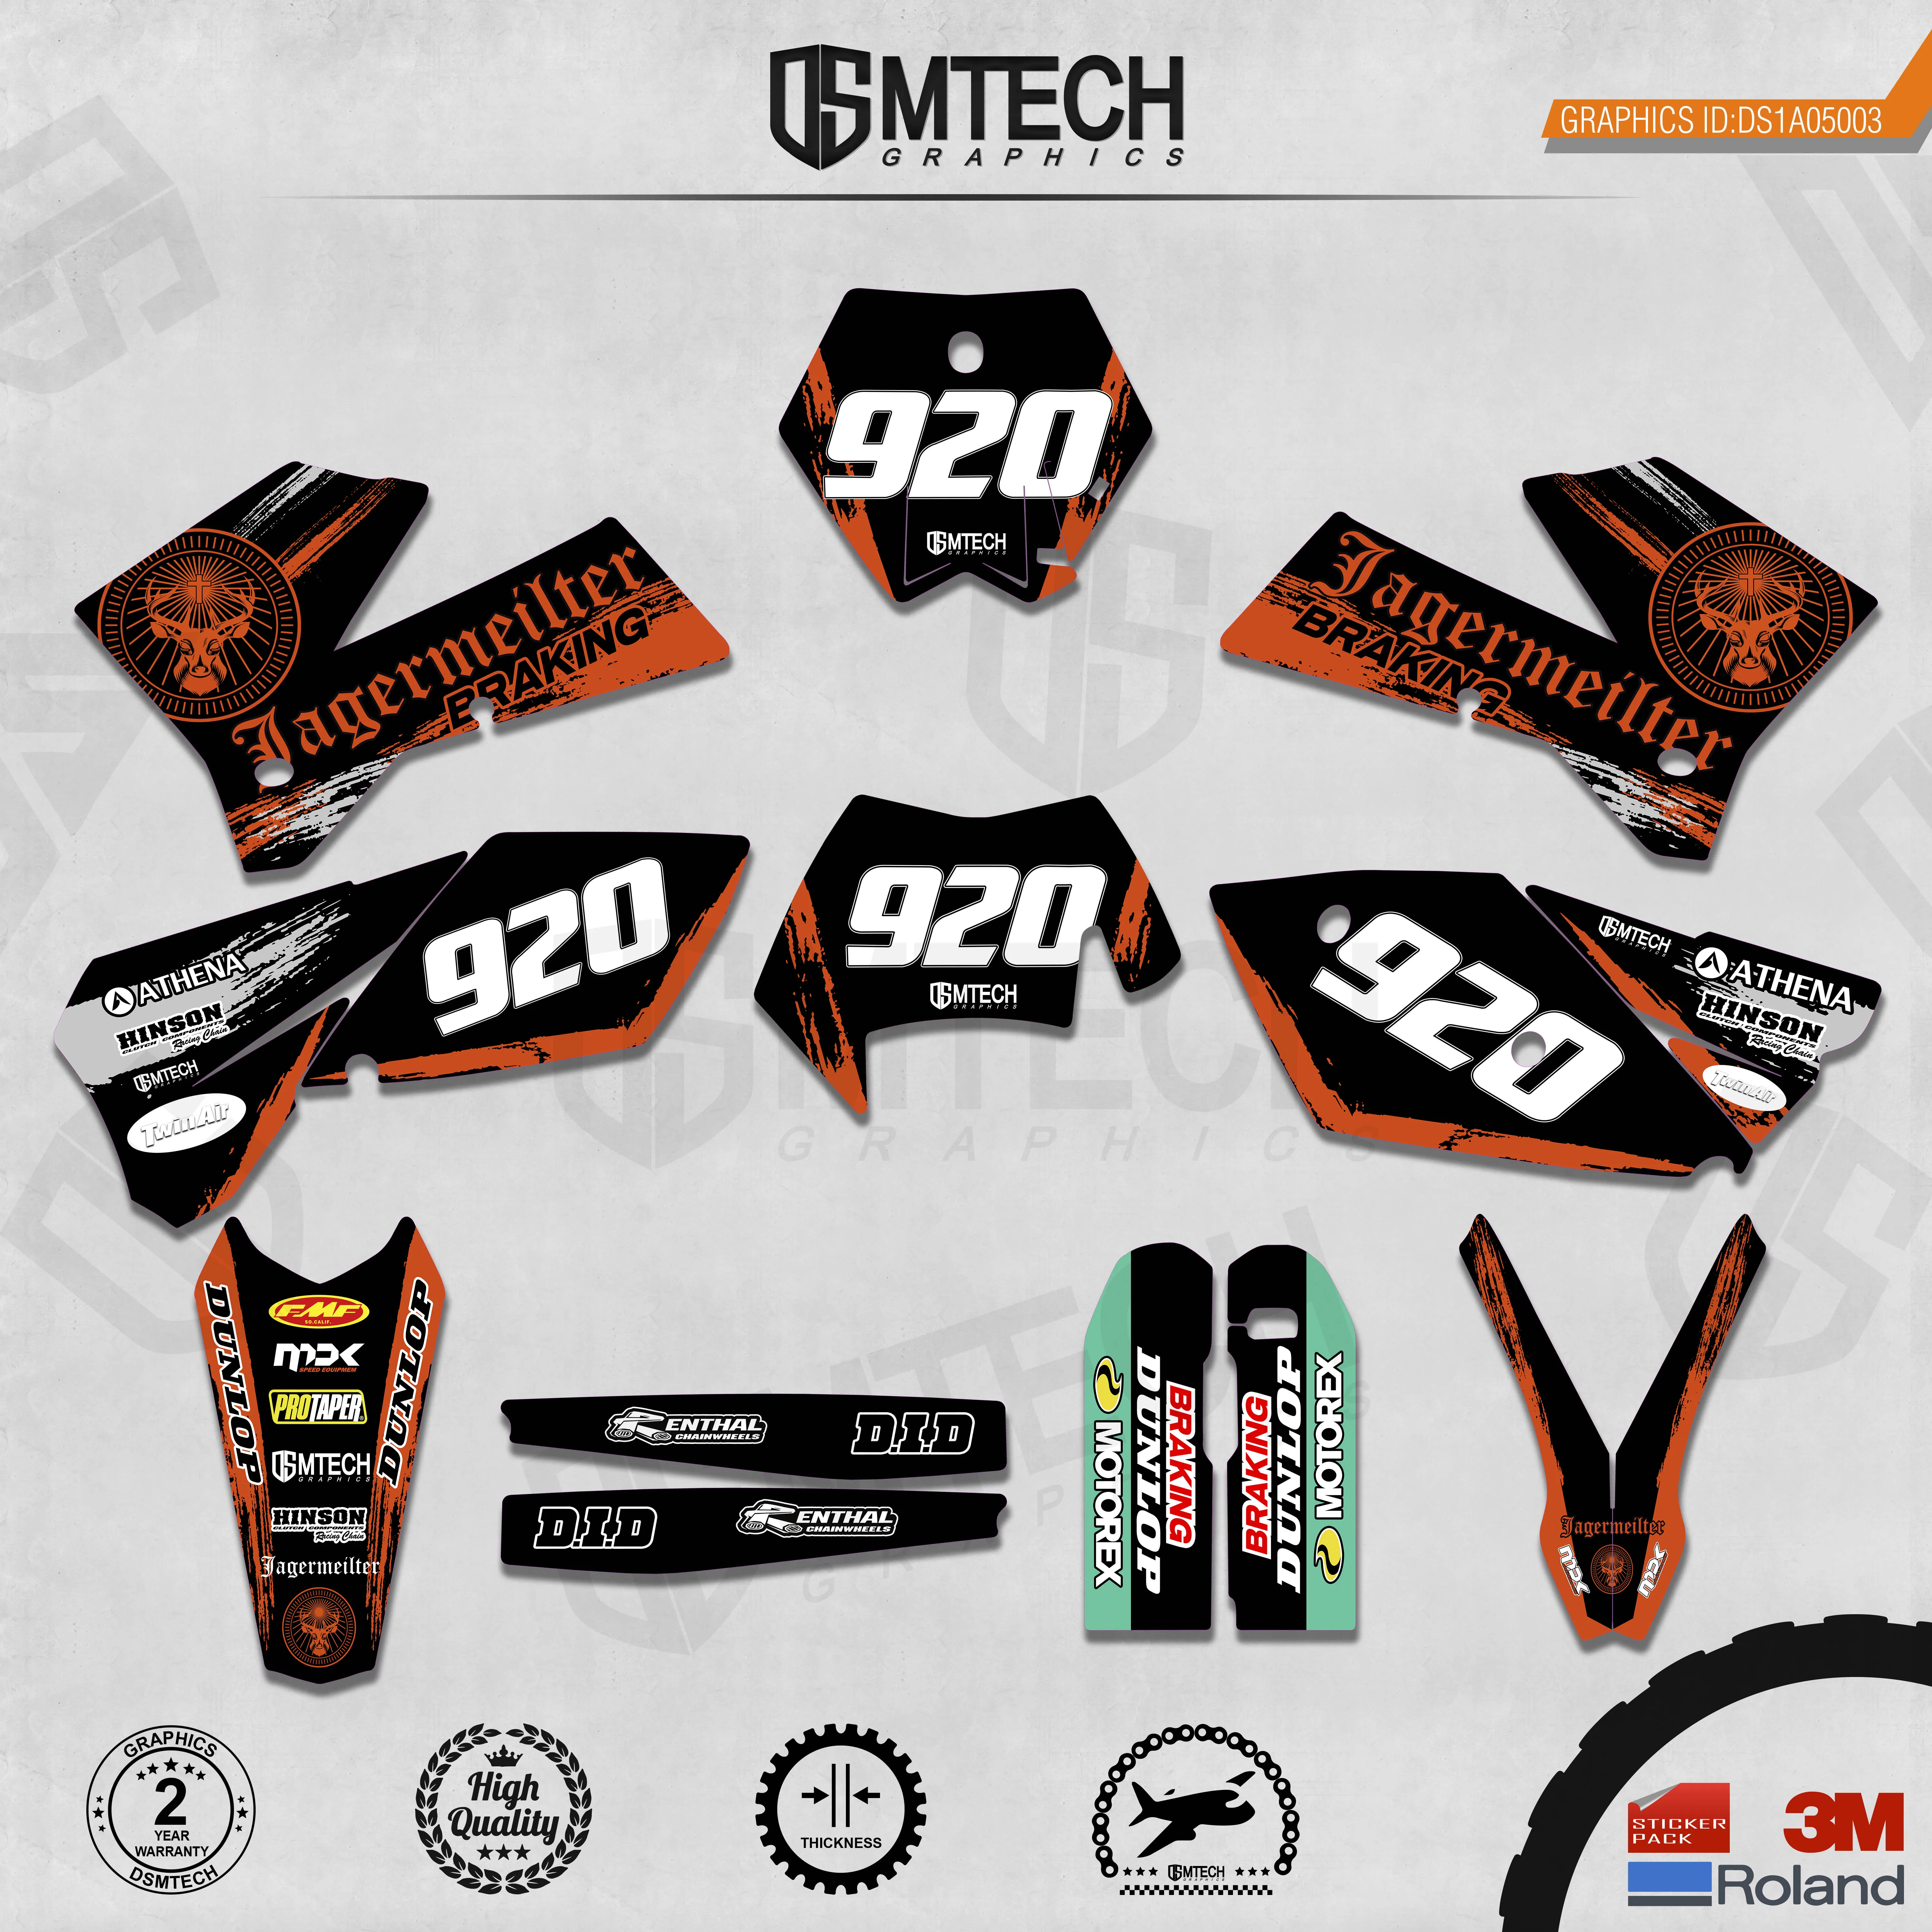 dsmtech-customized-team-graphics-backgrounds-decals-3m-custom-stickers-for-05-06sxf-06-07xcf-05-07exc-06-07xcw-003